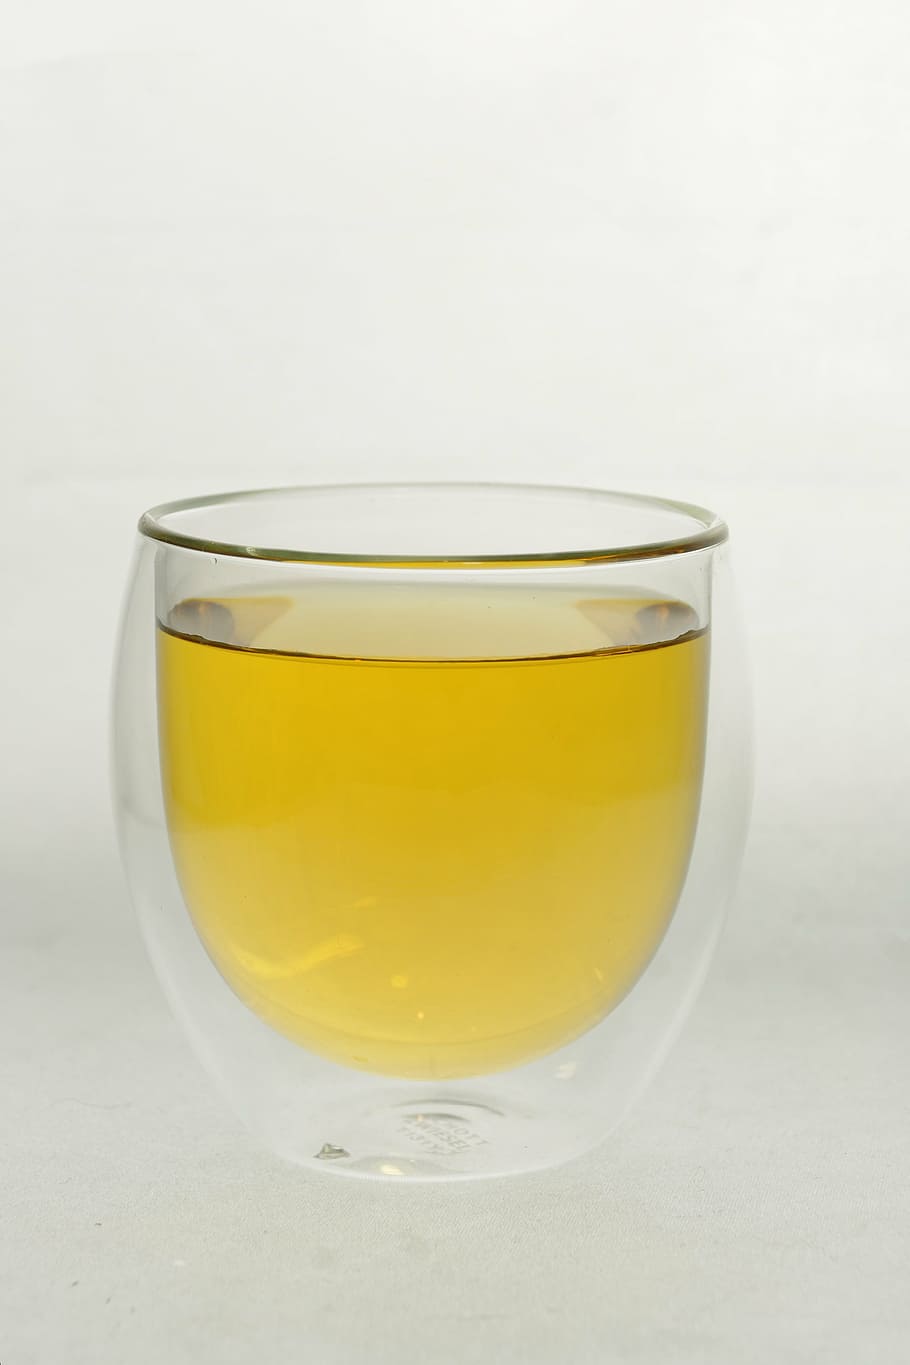 tee, glass, drink, delicious, enjoy, teatime, hot, drinking Glass, liquid, yellow